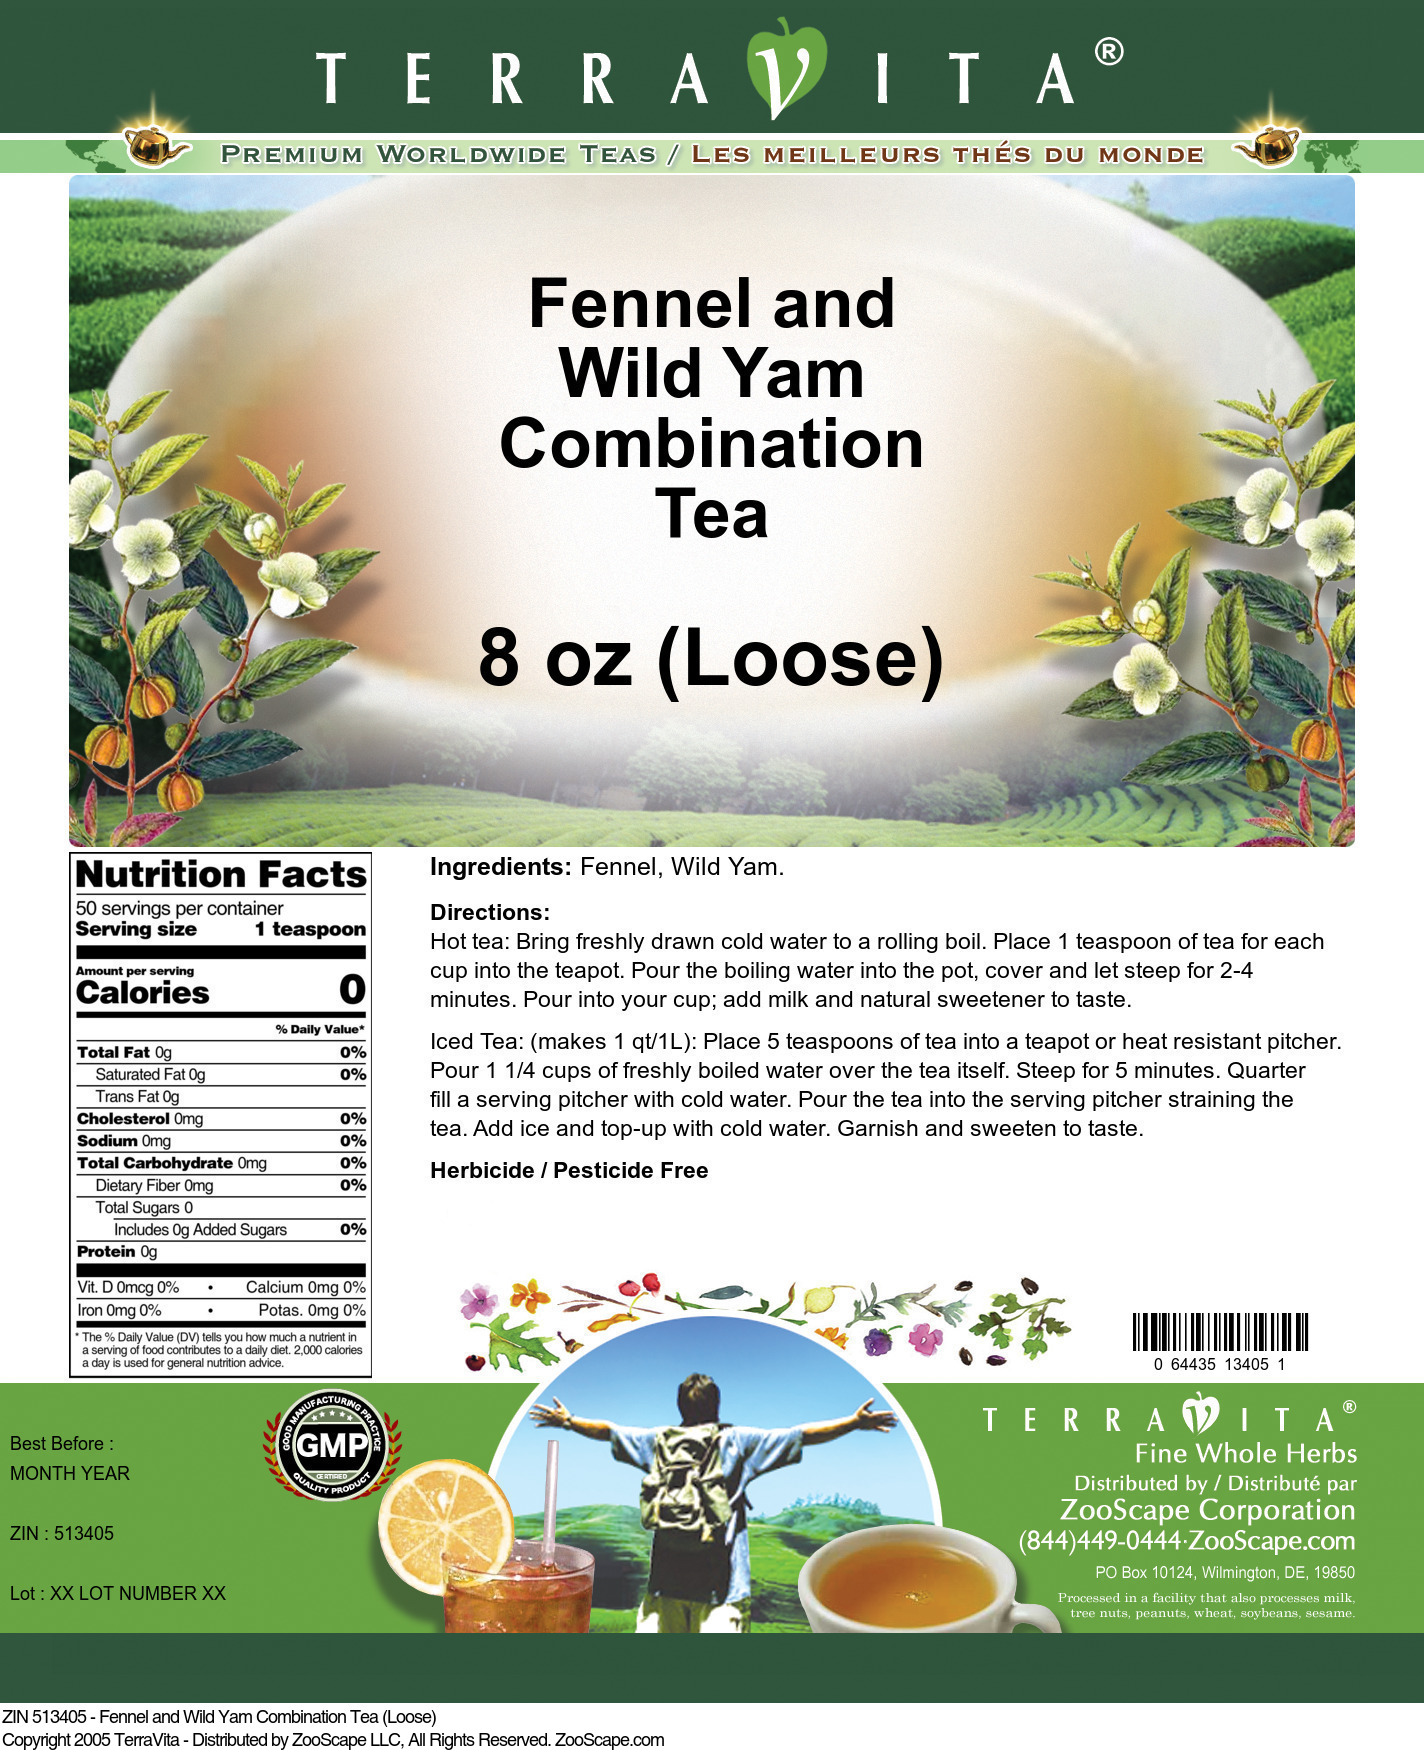 Fennel and Wild Yam Combination Tea (Loose) - Label